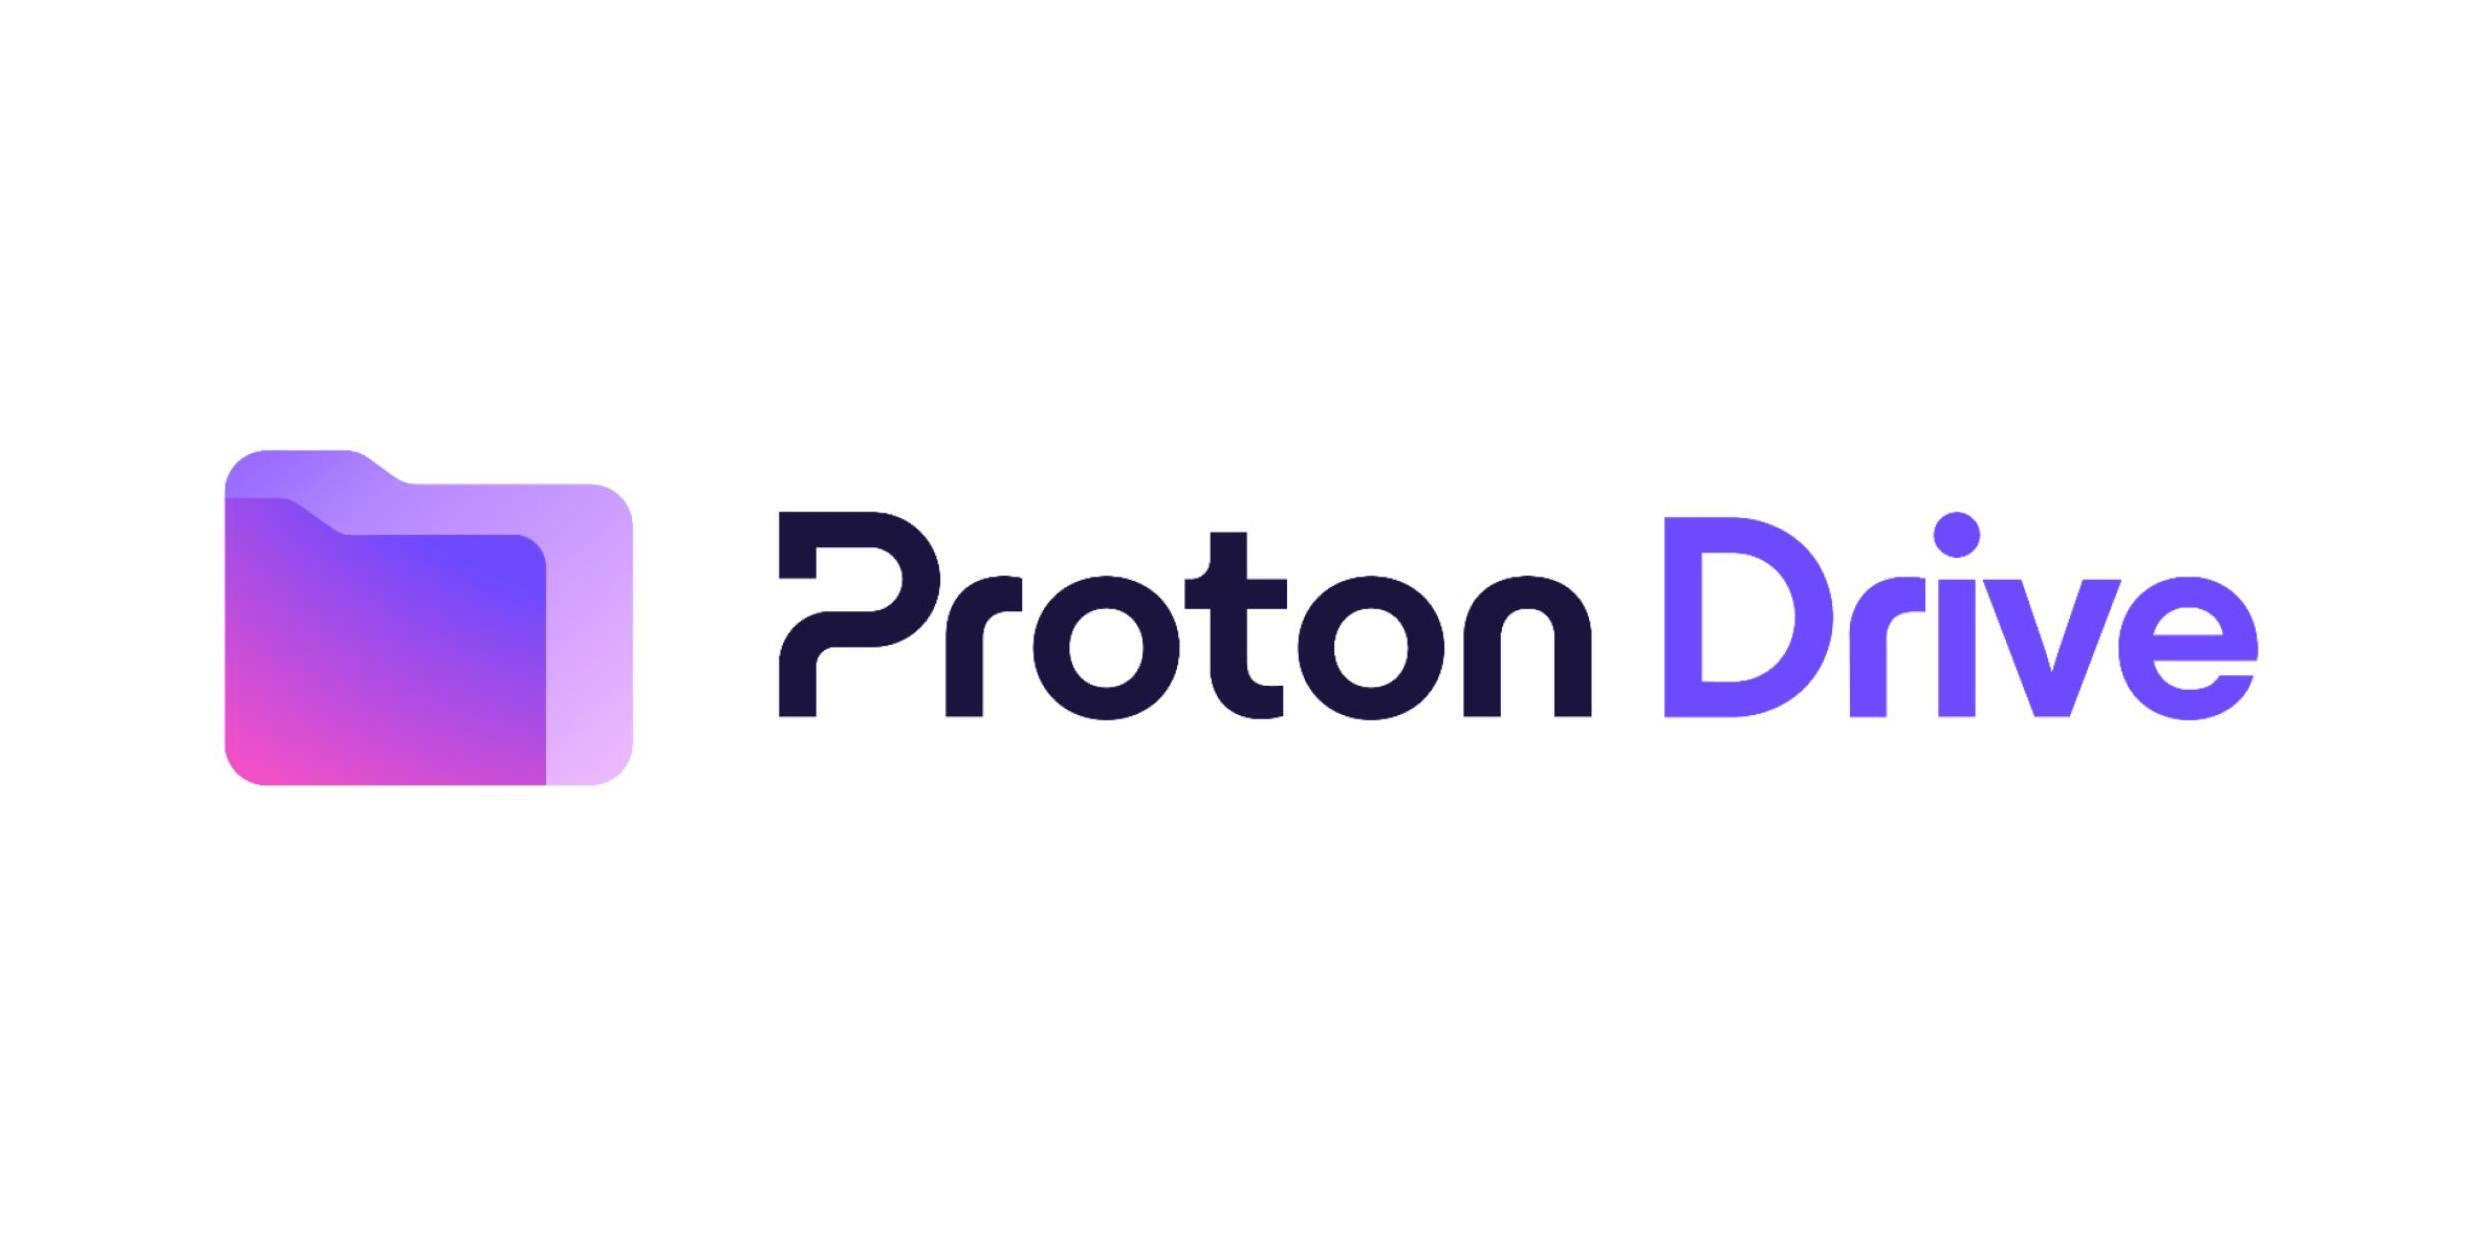 How to Fix "Cannot Upload: File No Longer Exists" Error on Proton Drive ? 3